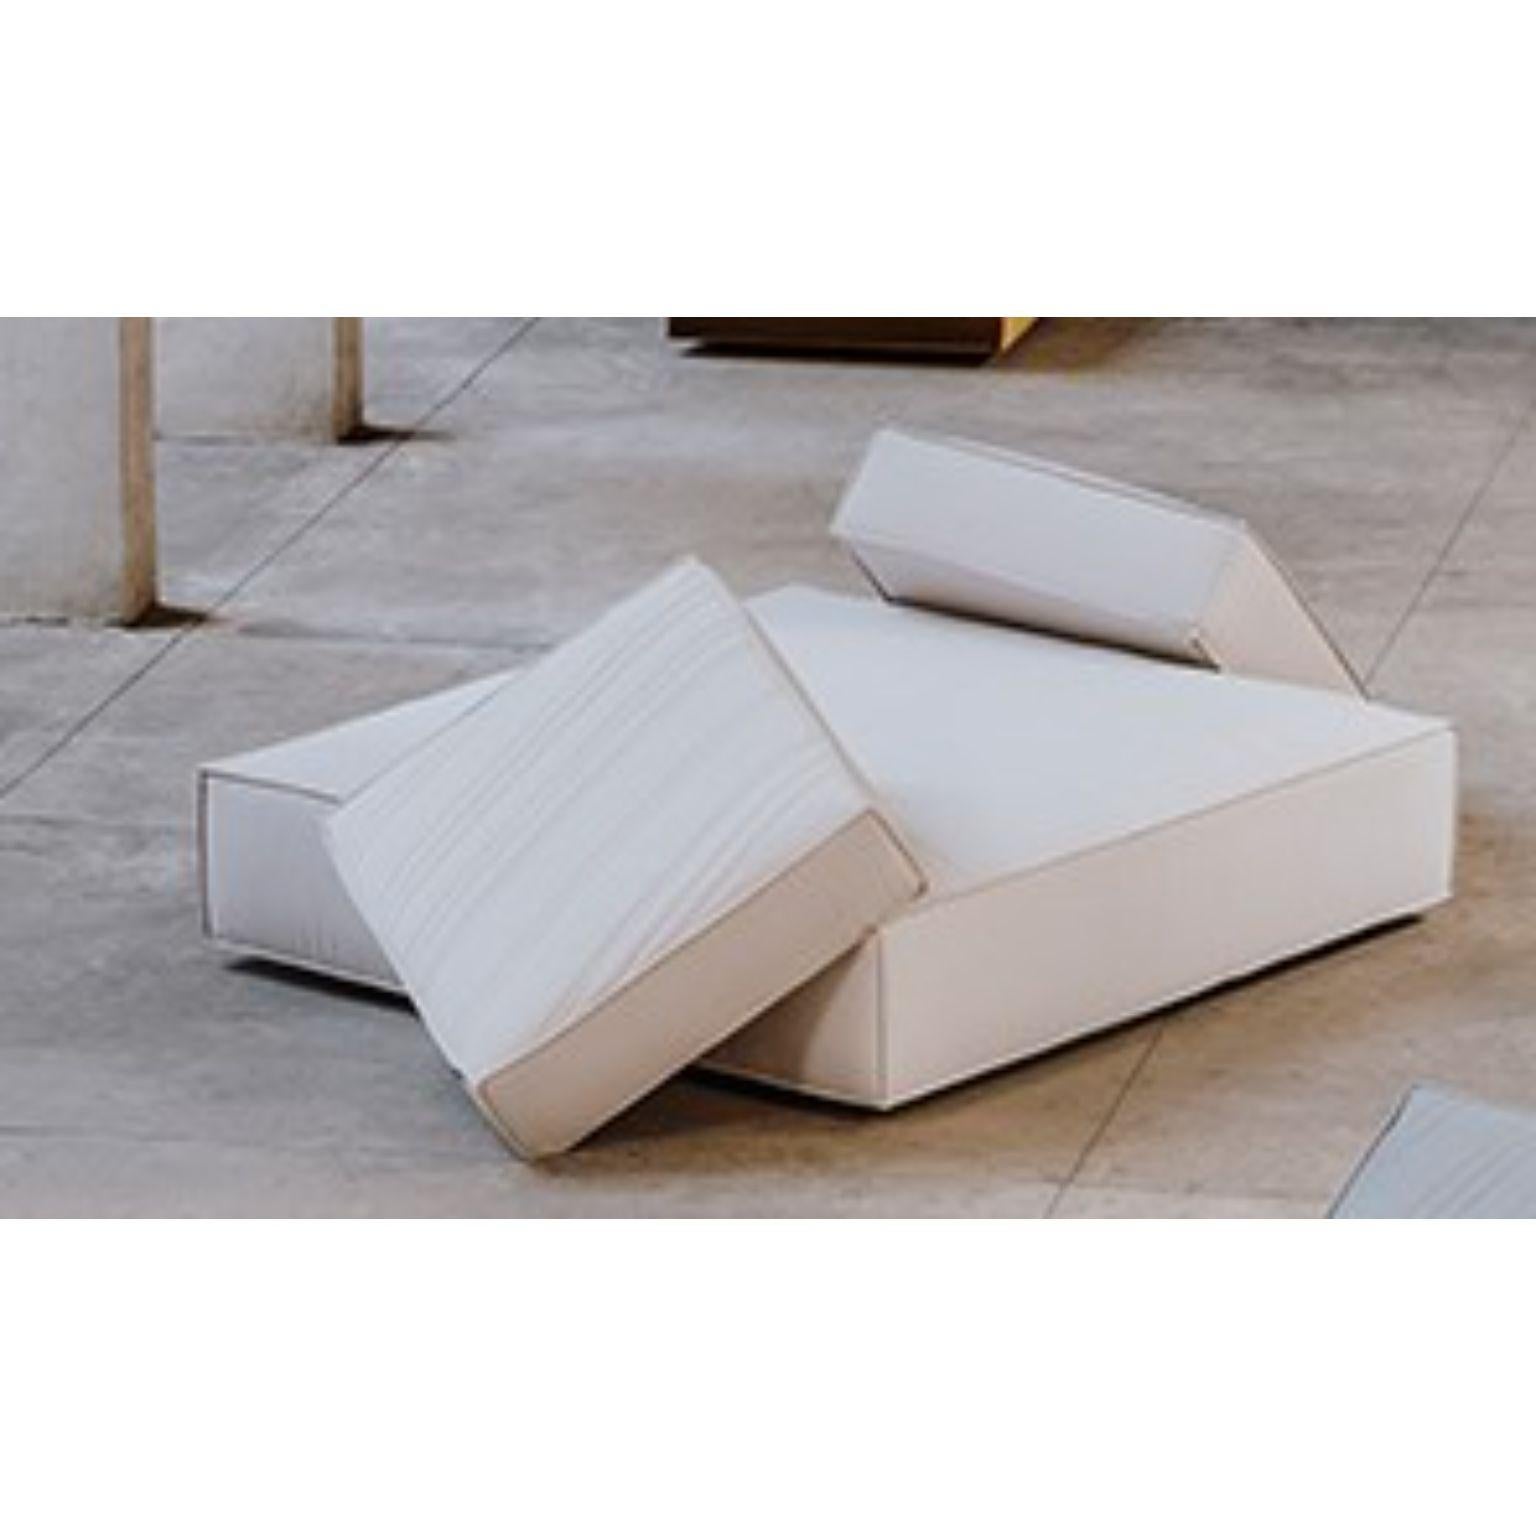 Stack pouf by Nendo.
Pouf with cushion.
Materials: upholstery: fabric.
 Structure: black lacquered MDF.
Dimensions: W314 x D180 xH90 cm.
 HS 42 cm.

Also available in leather.
  

Stack is a cushion casually tossed on top of another